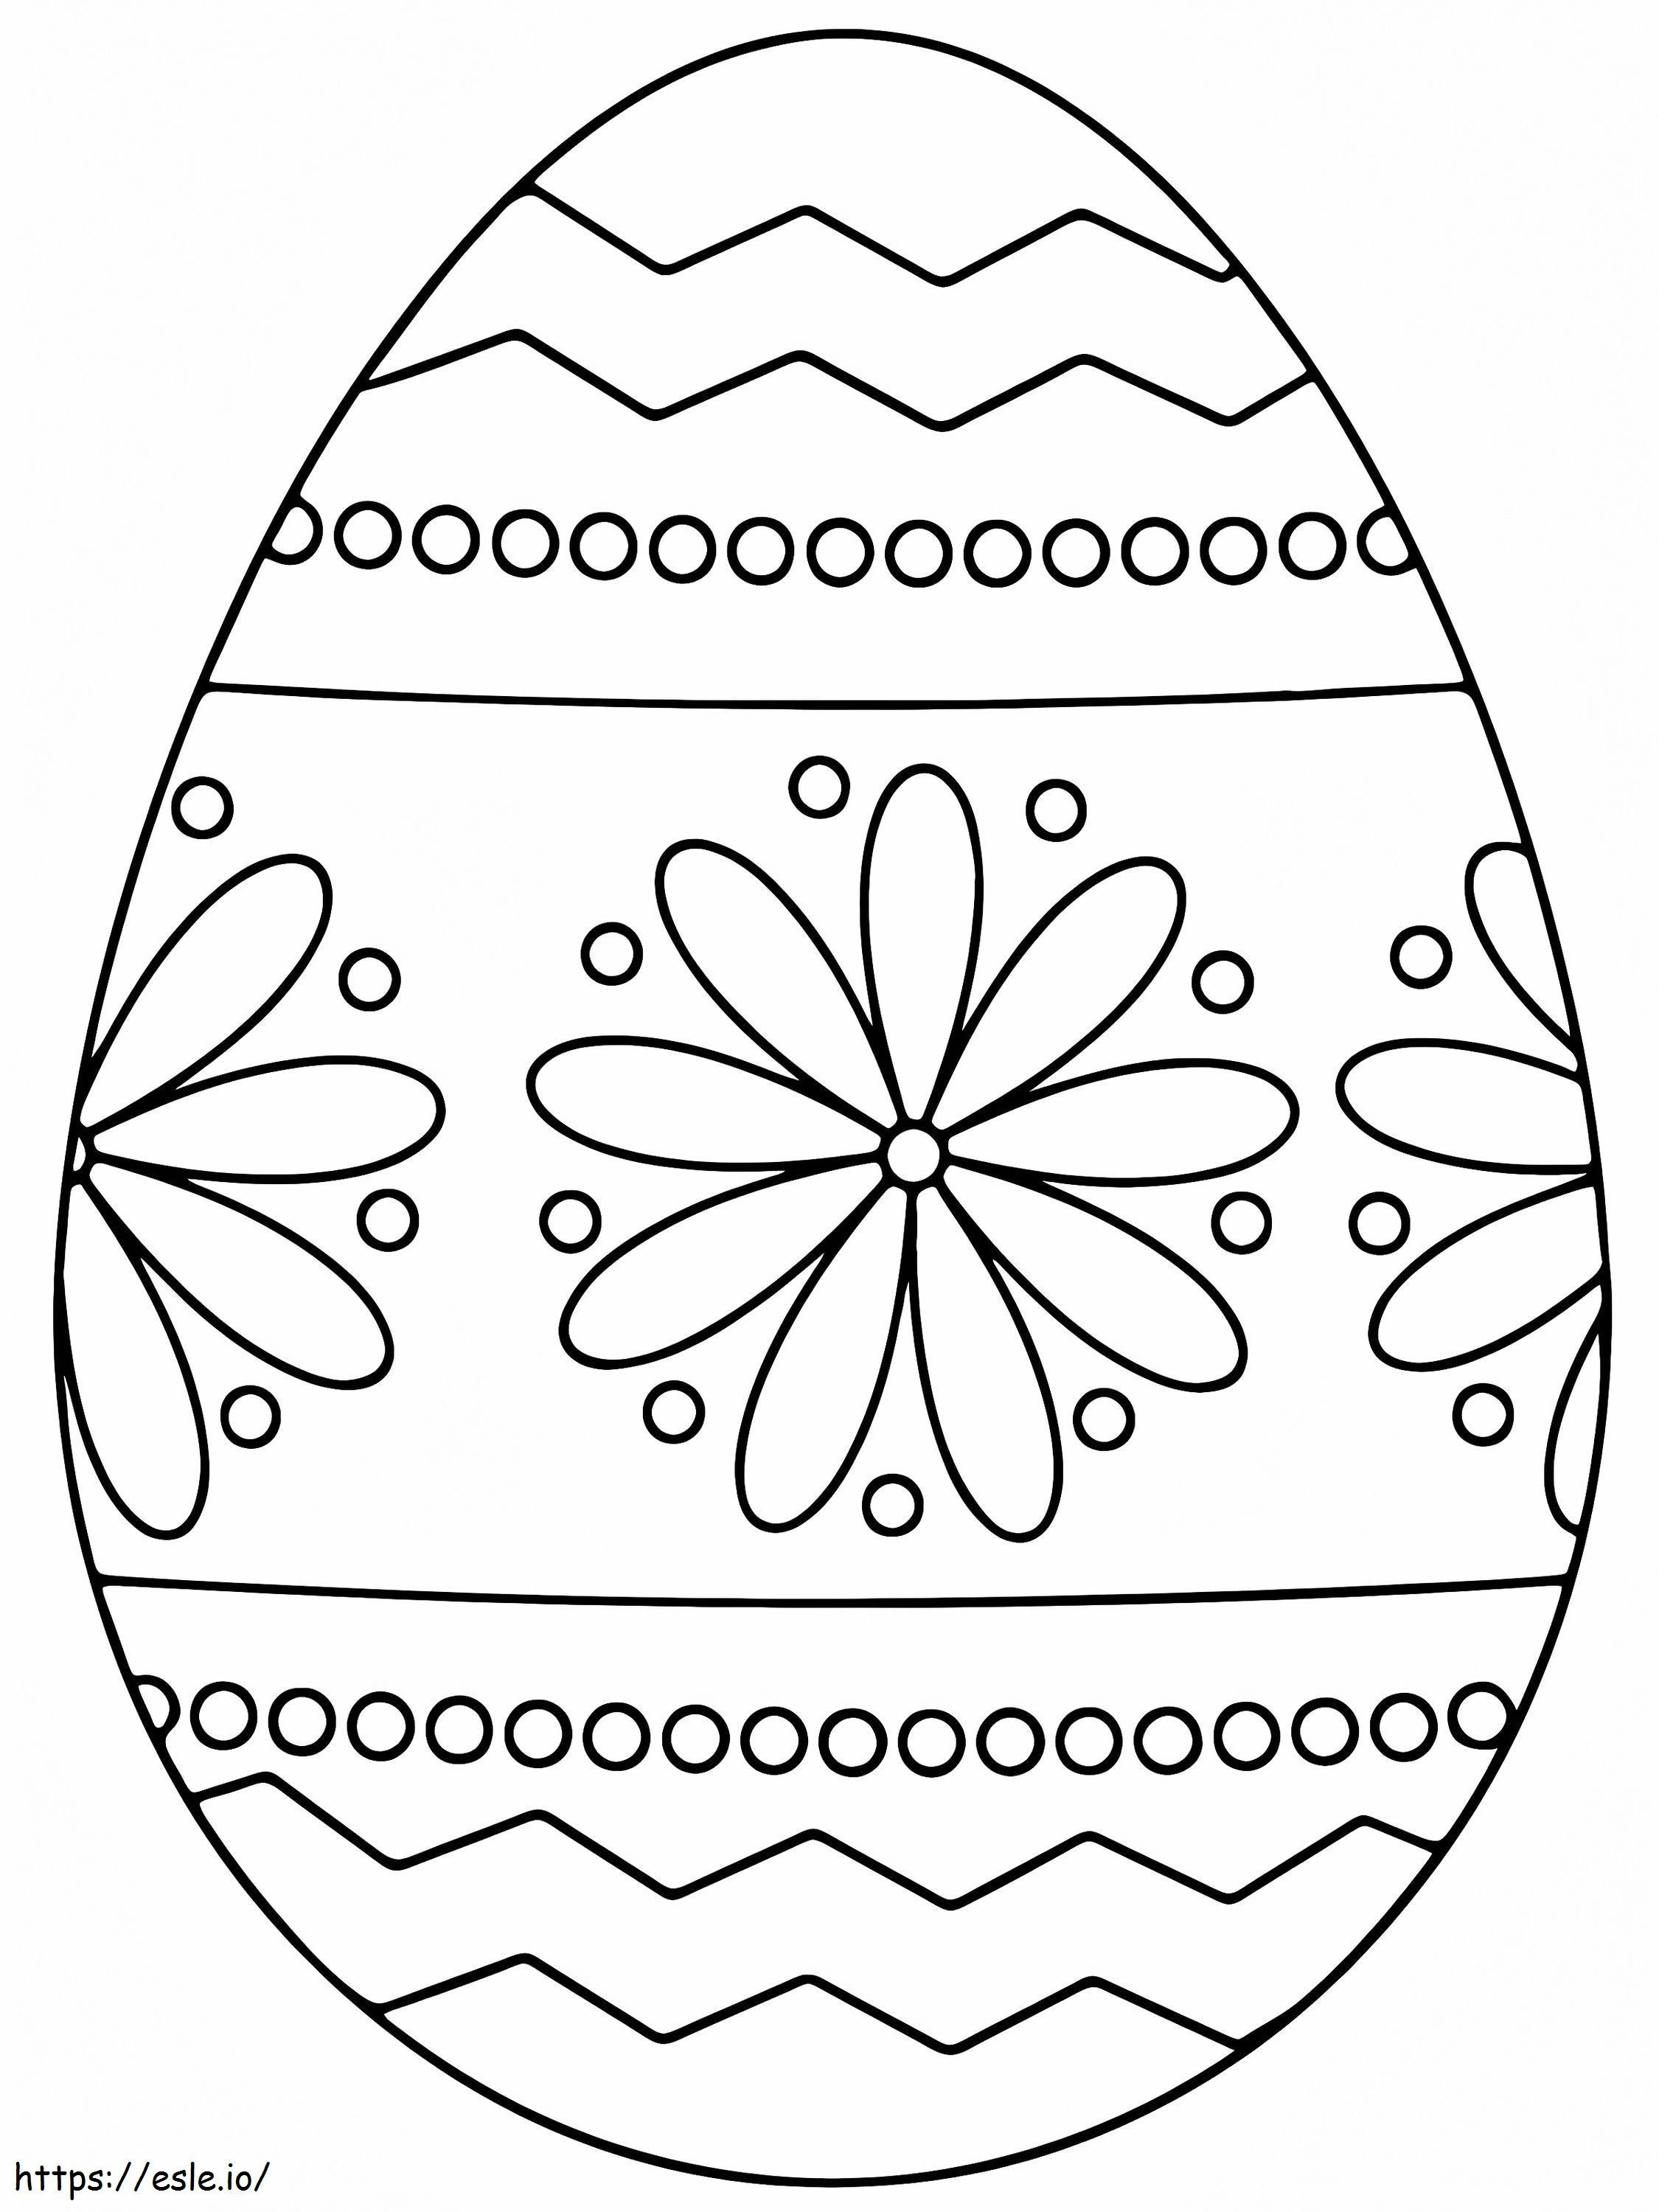 Rare Easter Egg coloring page